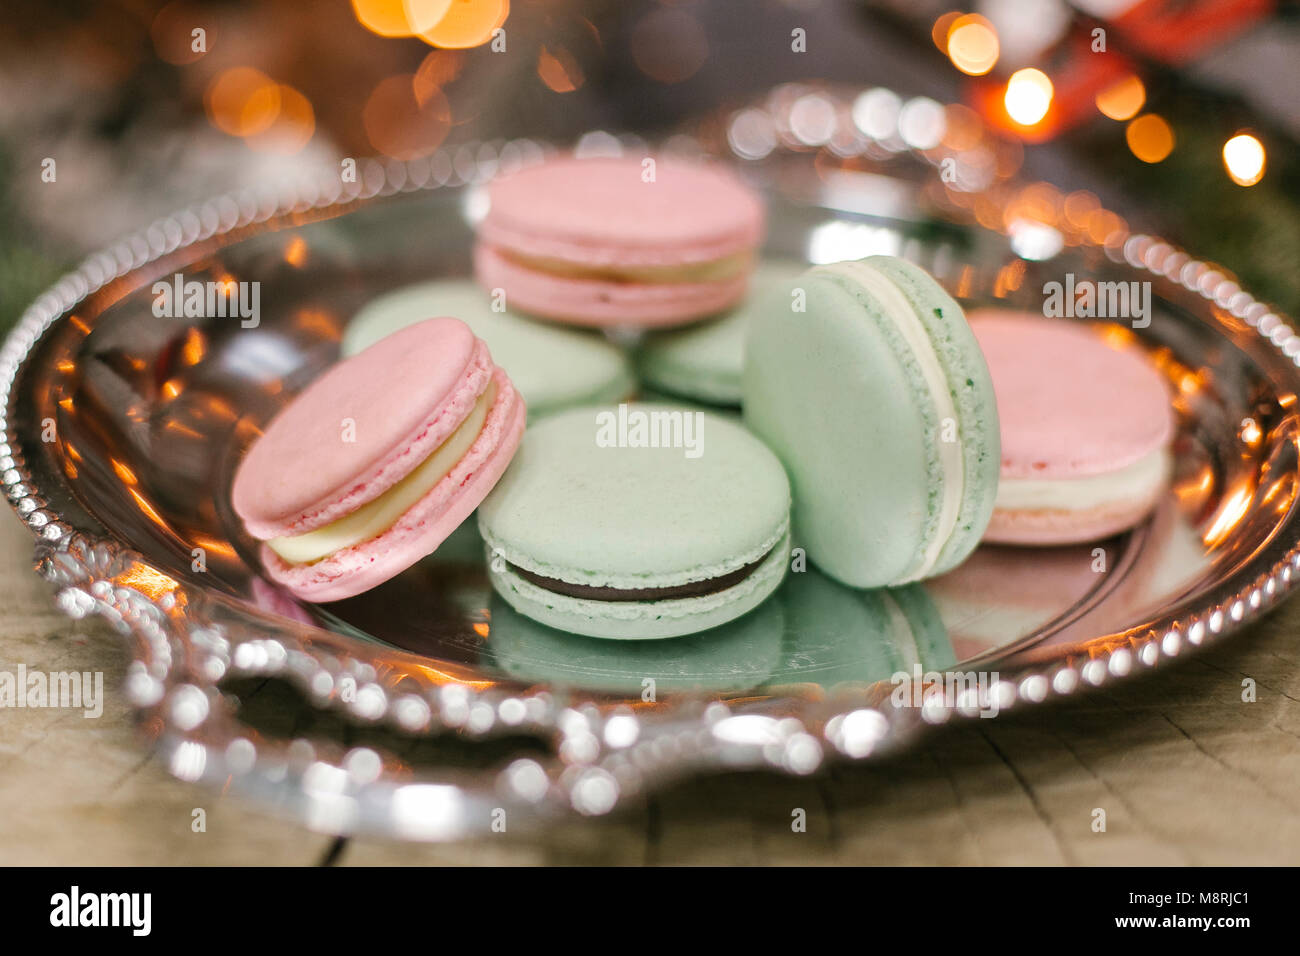 High angle view of macaroons in plate on table Stock Photo